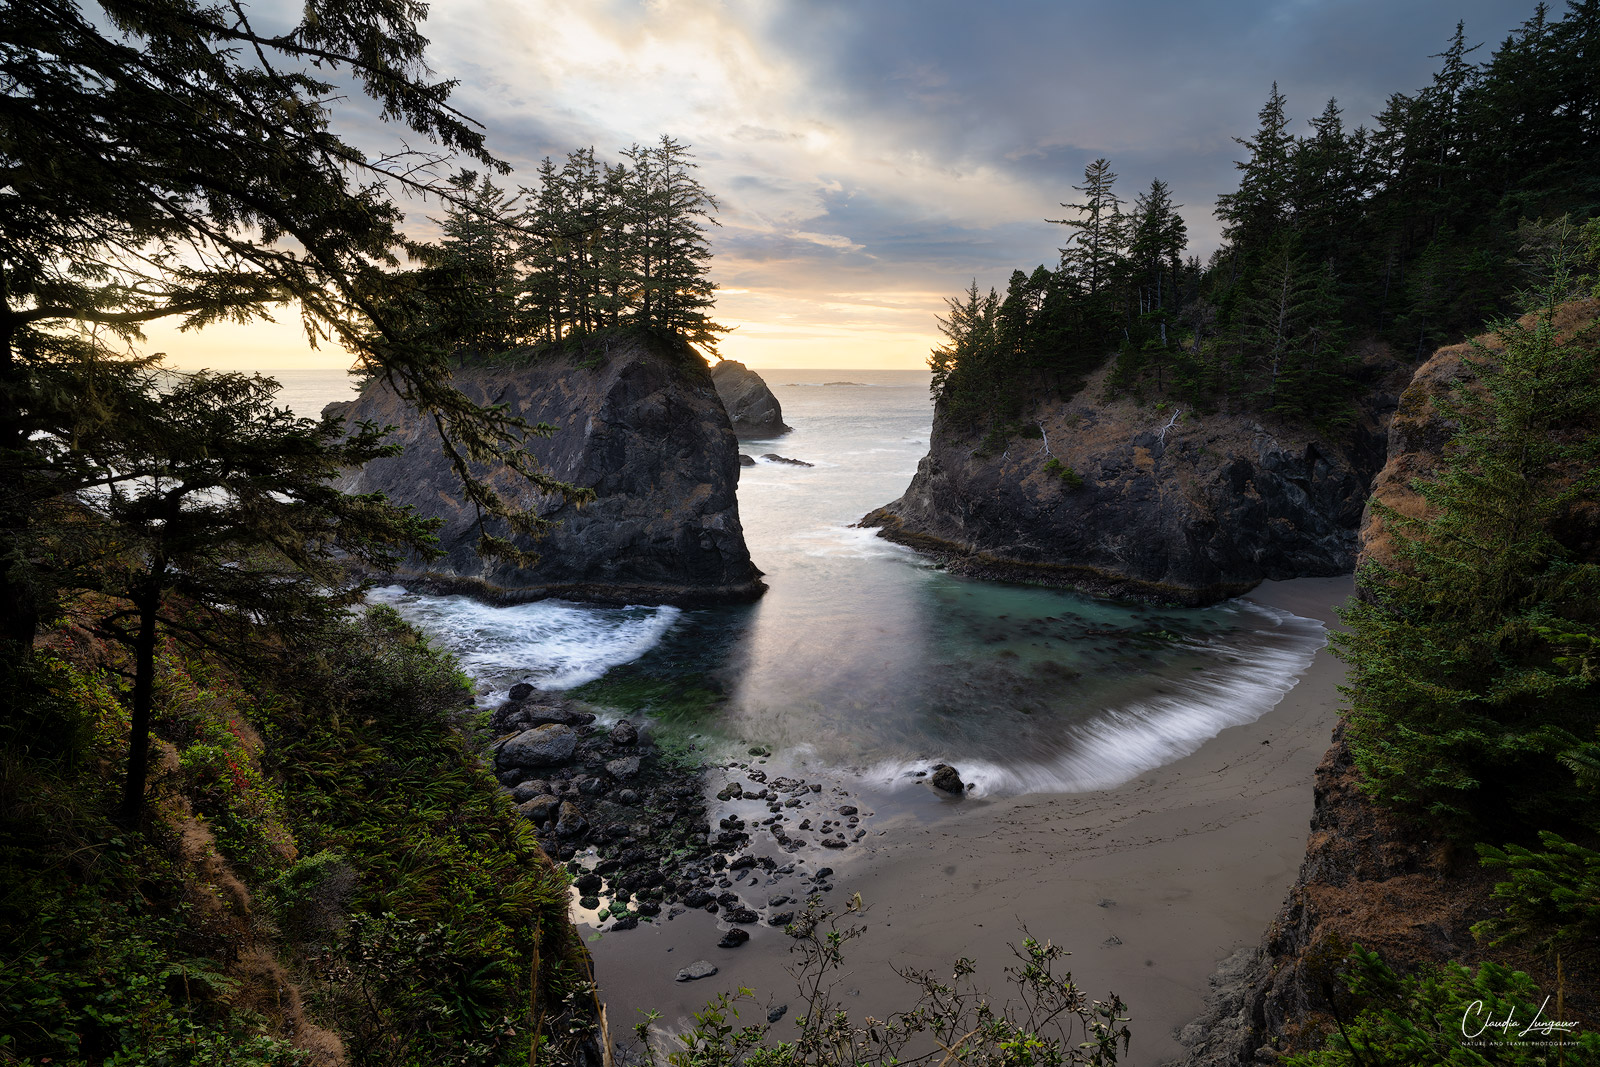 View of sea stack at Samuel H. Boardman State Park in Oregon.